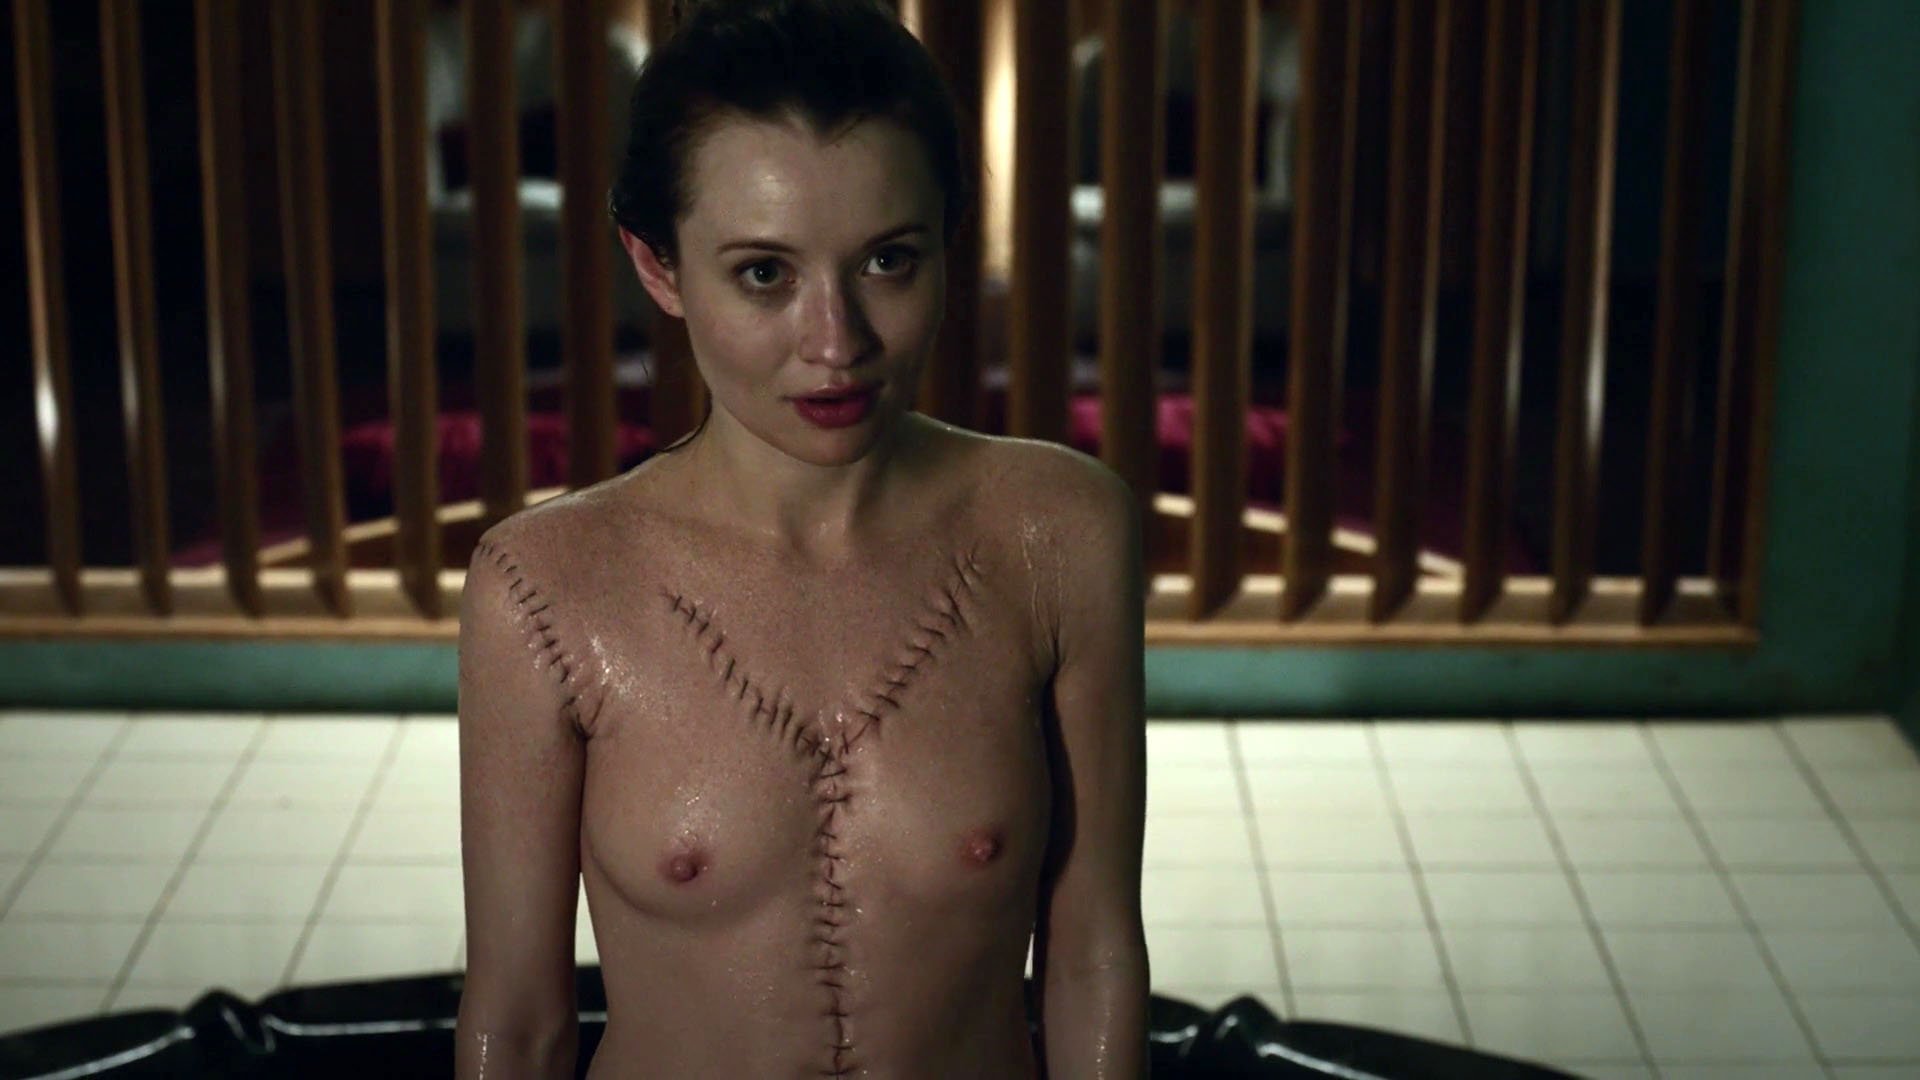 Emily Browning nude - American Gods s01e05 (2017)